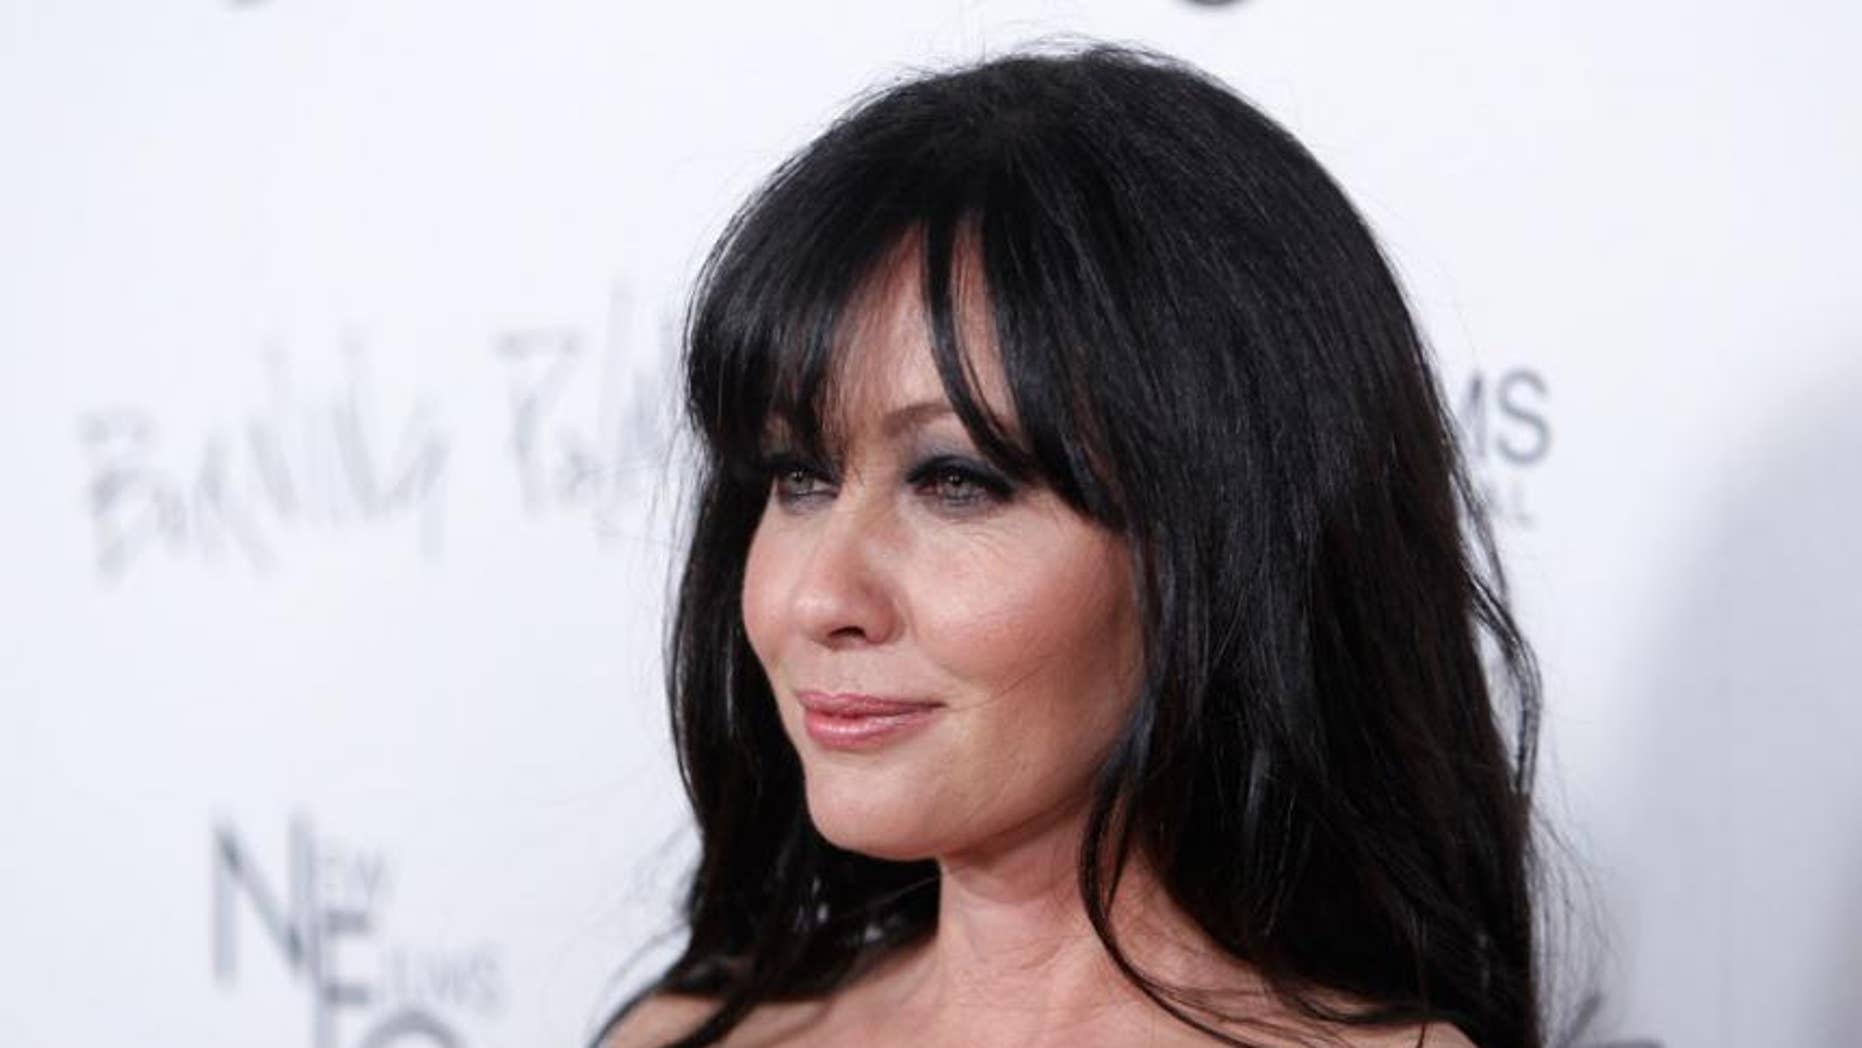 Shannen Doherty Details How She Nearly Gave Up Hope During Grueling 